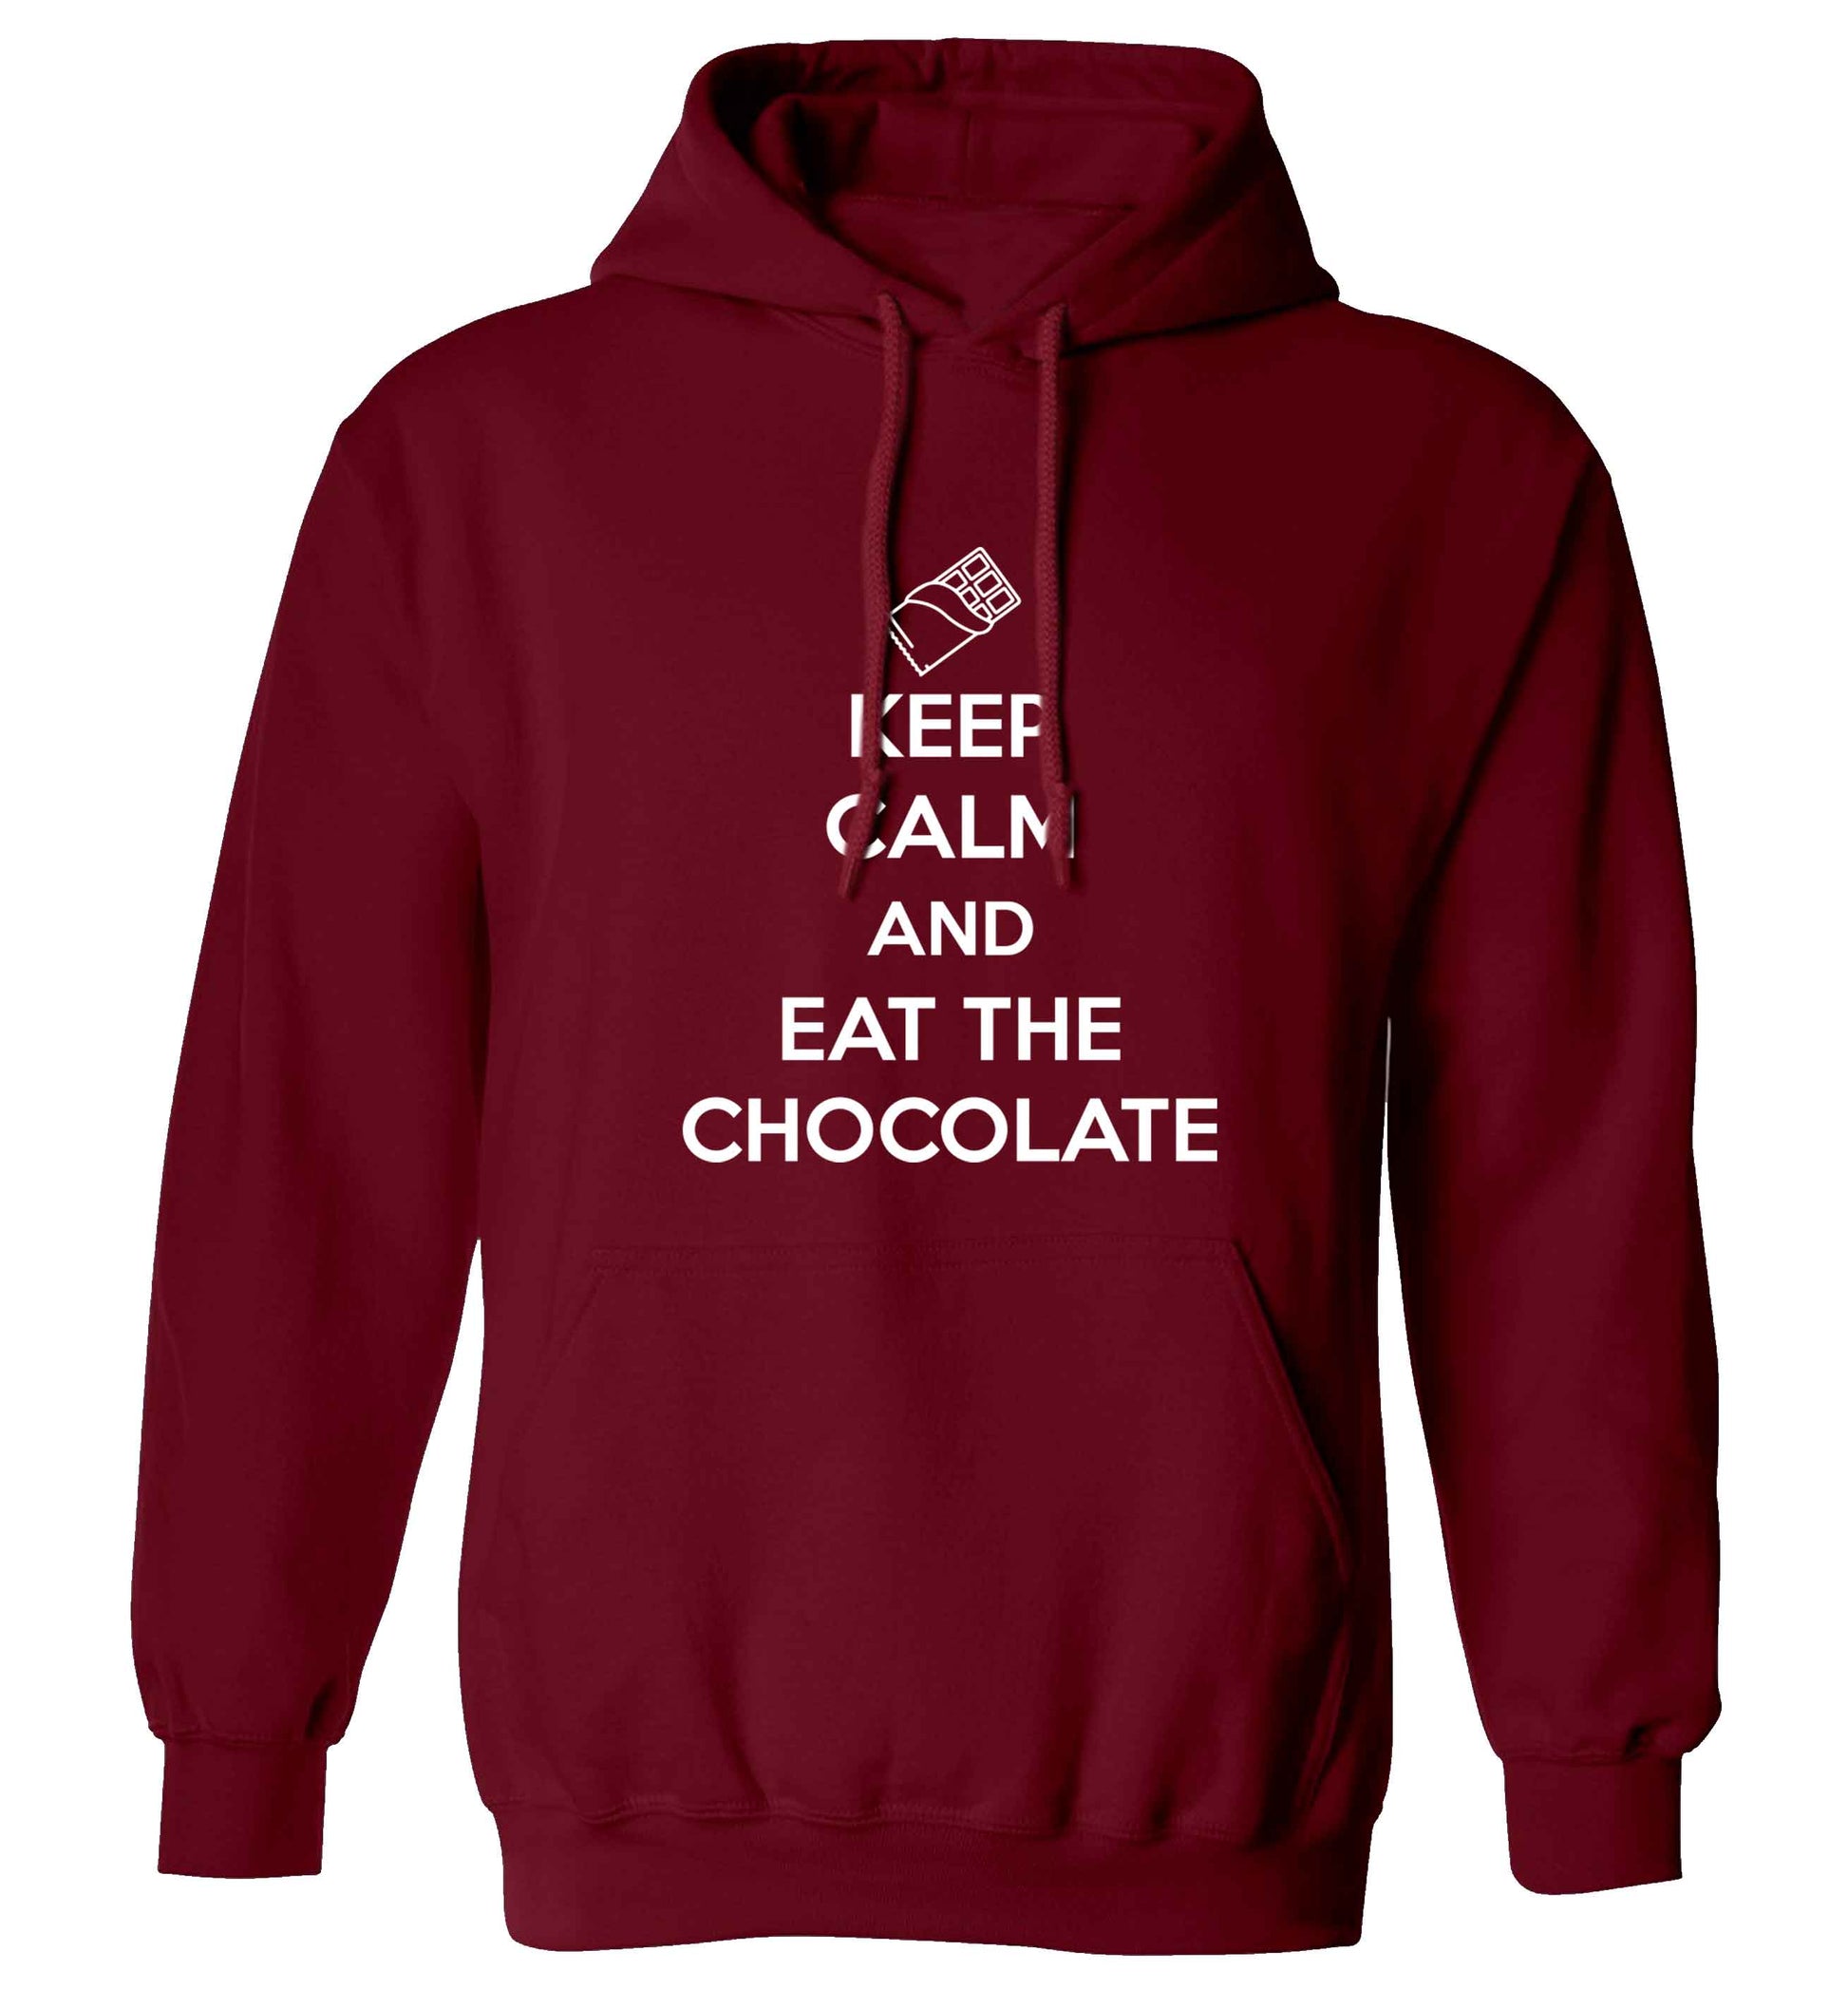 funny gift for a chocaholic! Keep calm and eat the chocolate adults unisex maroon hoodie 2XL